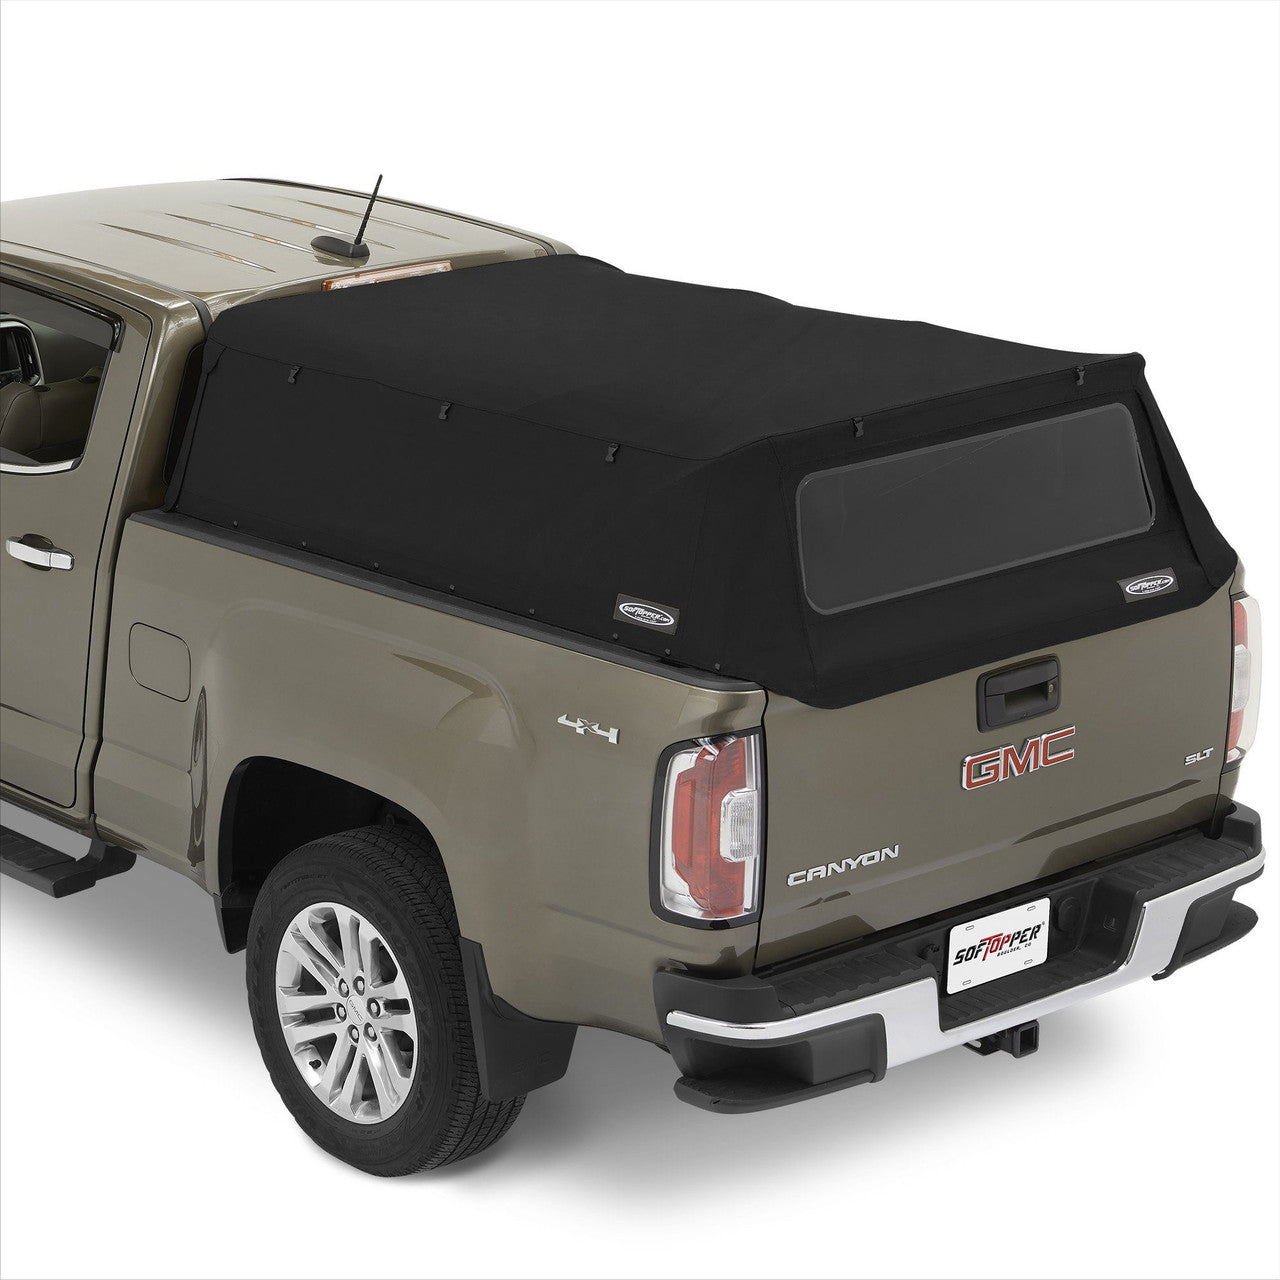 Image showing  black SofTopper mounted on GMC Canyon